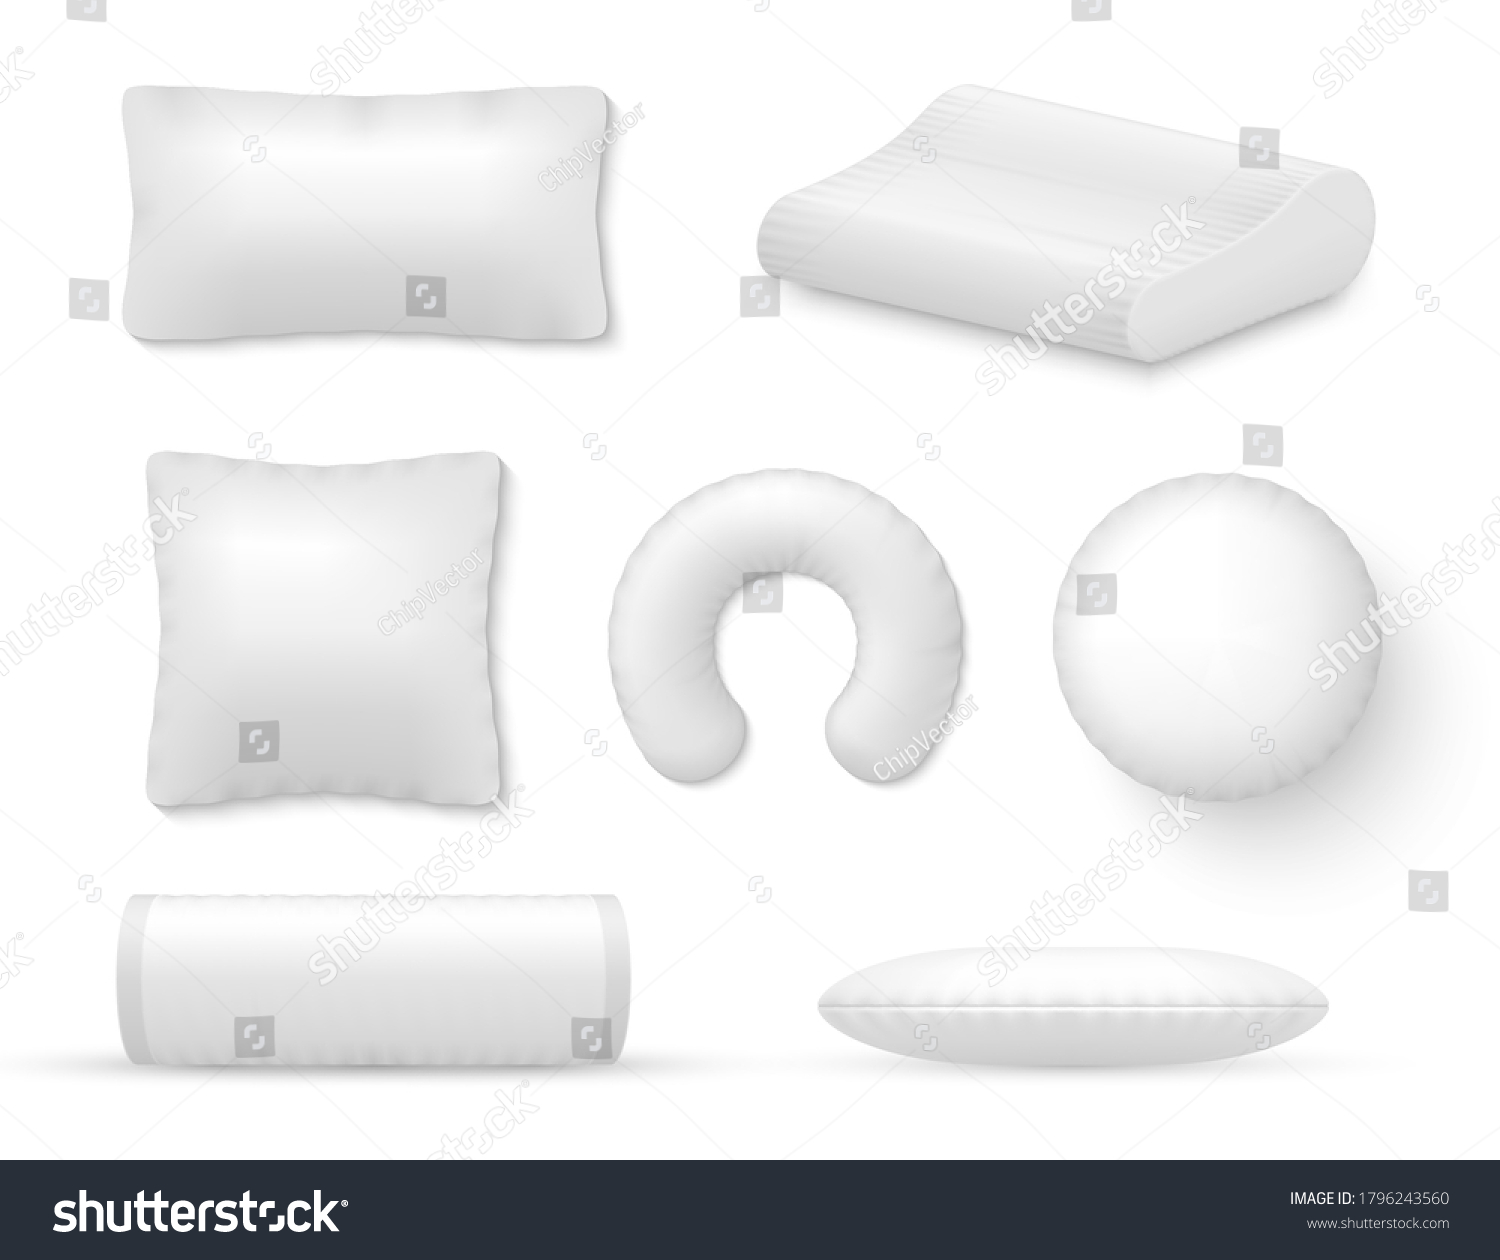 SVG of Pillow, cushion white for sleep, rest, relax realistic mockups set. Soft support of body for comfort, therapy or decoration. Bedroom interior elements templates. Vector pillow isolated on white. svg